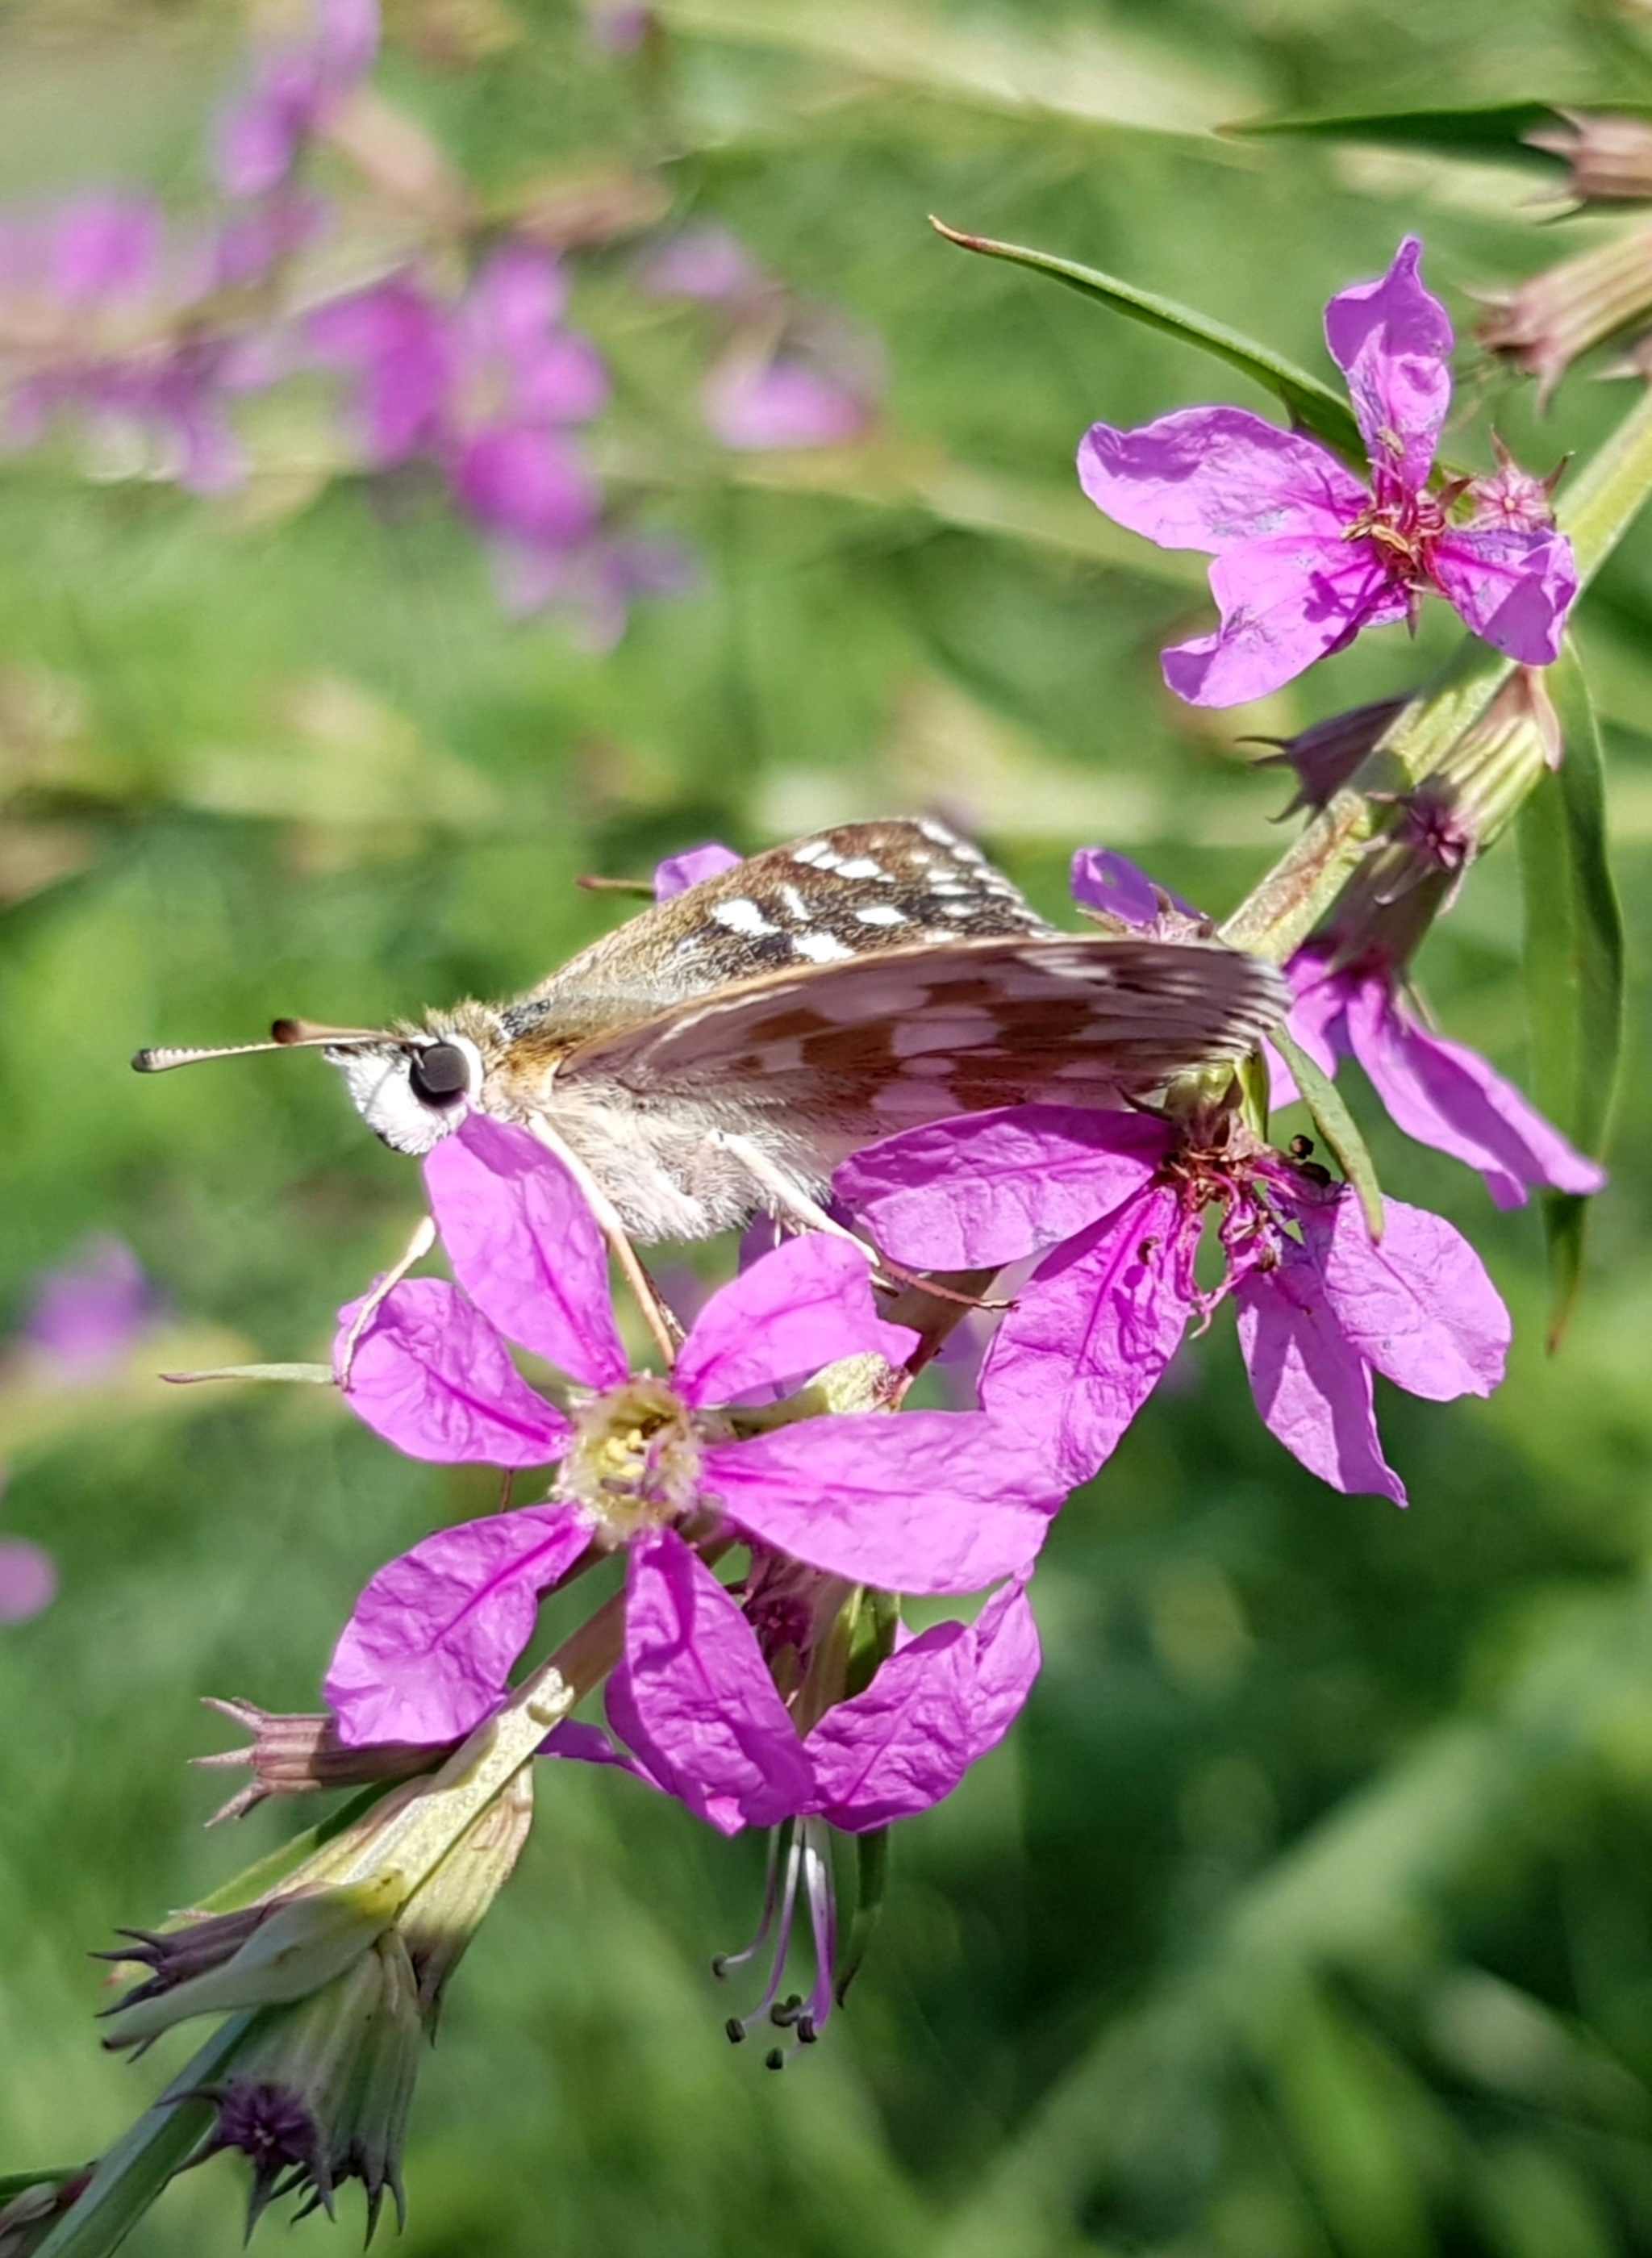 Post #11554693 - My, Summer, Heat, Butterfly, Flowers, Steppe, Entomology, Vertical video, Insects, Plants, Macro photography, Video, Longpost, Mobile photography